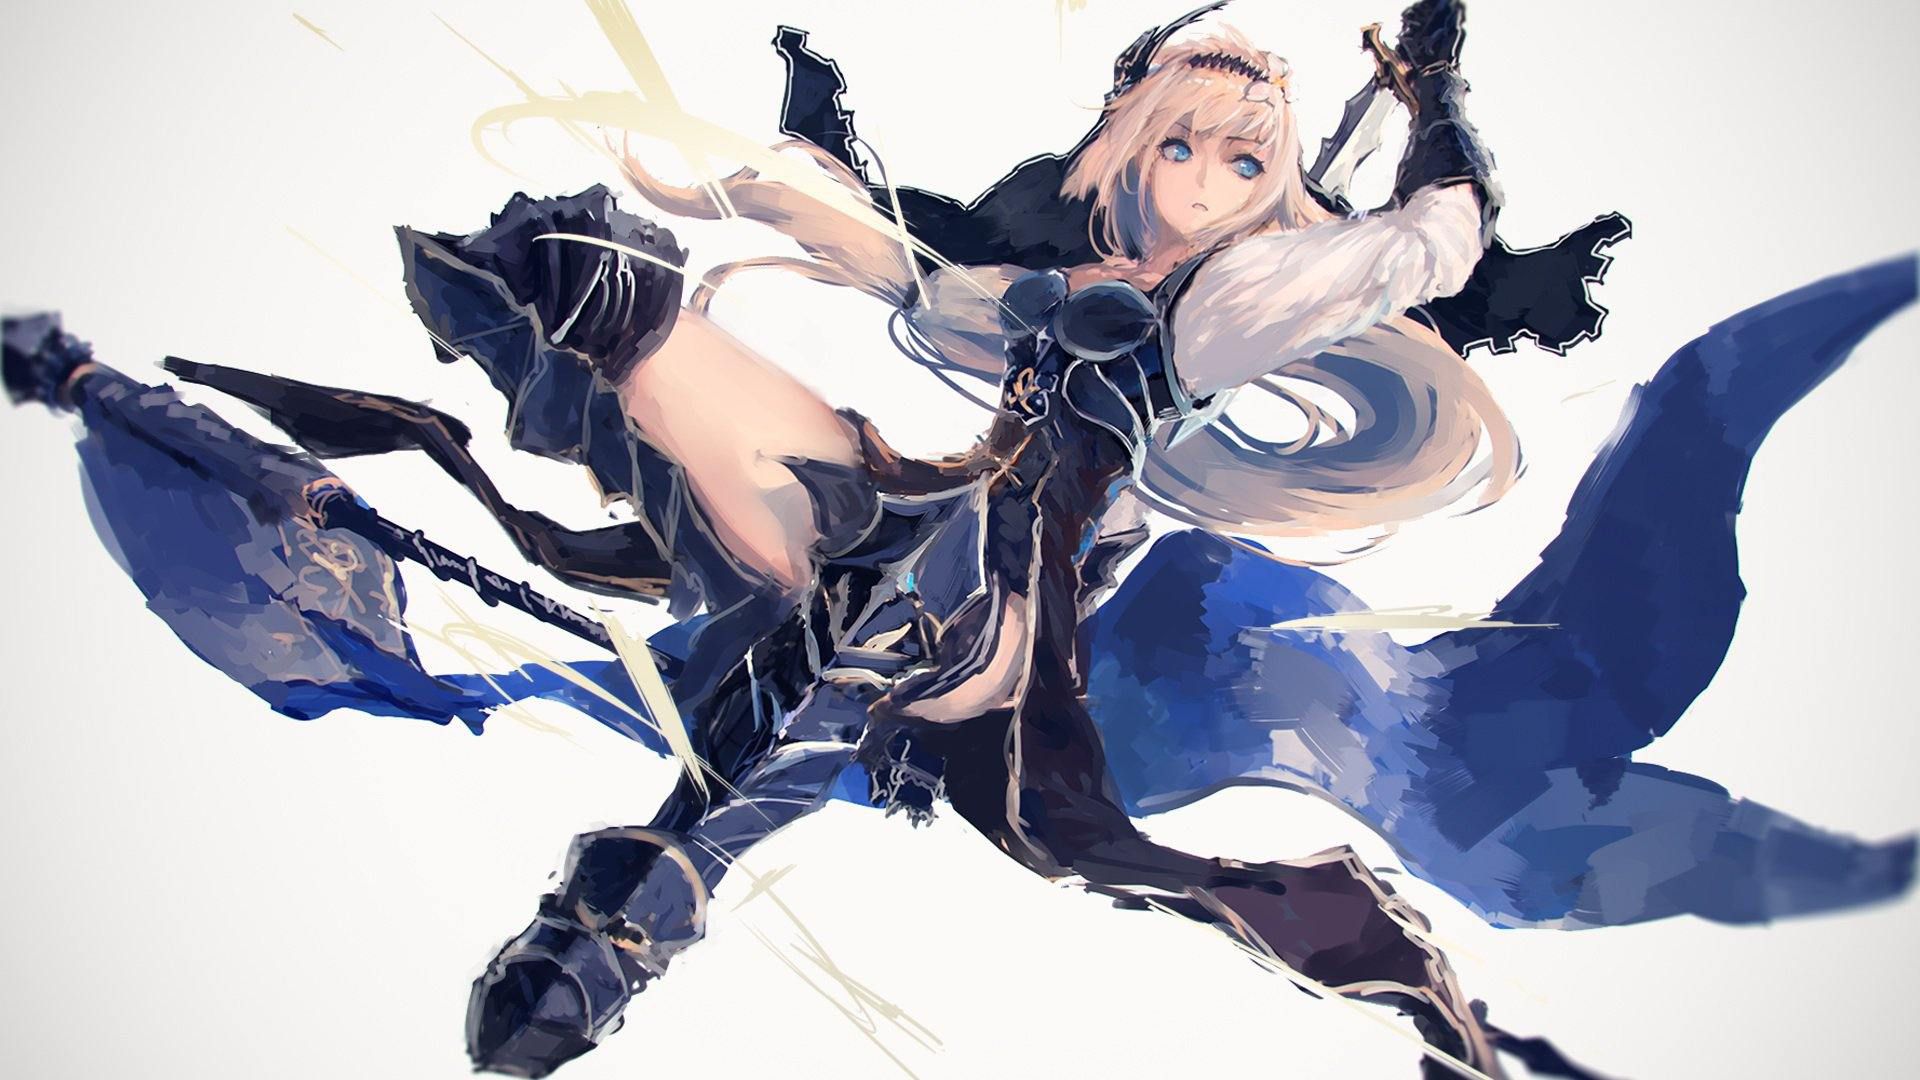 Jeanne Darc's free erotic image summary that makes you happy just by looking at it! (Granblue Fantasy) 20